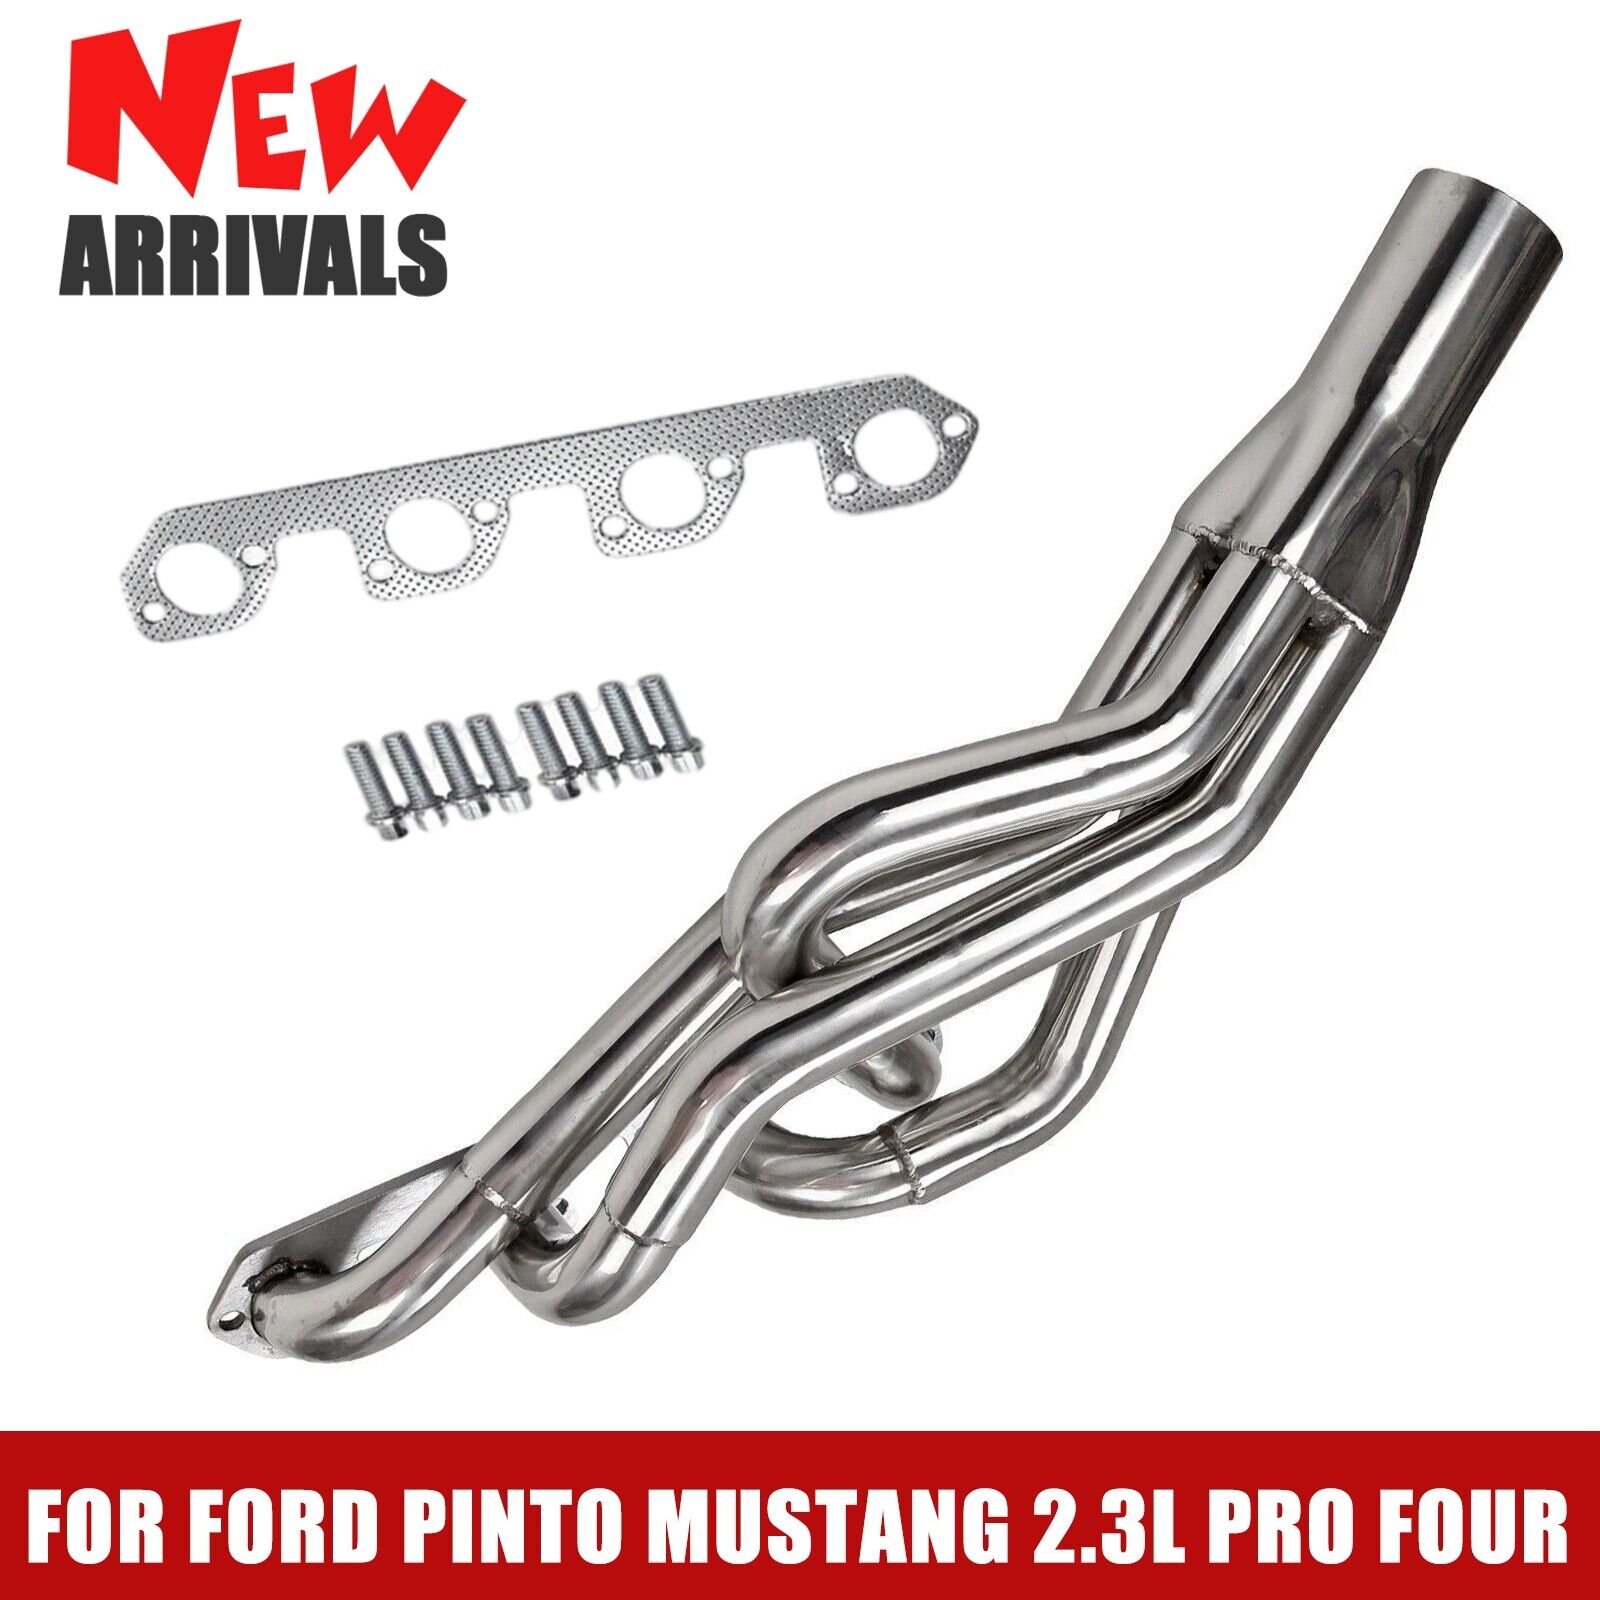 Stainless Steel Manifold Header Fits 74-80 Ford Pinto 82-92 Ranger 2.3L 4Cy PrO